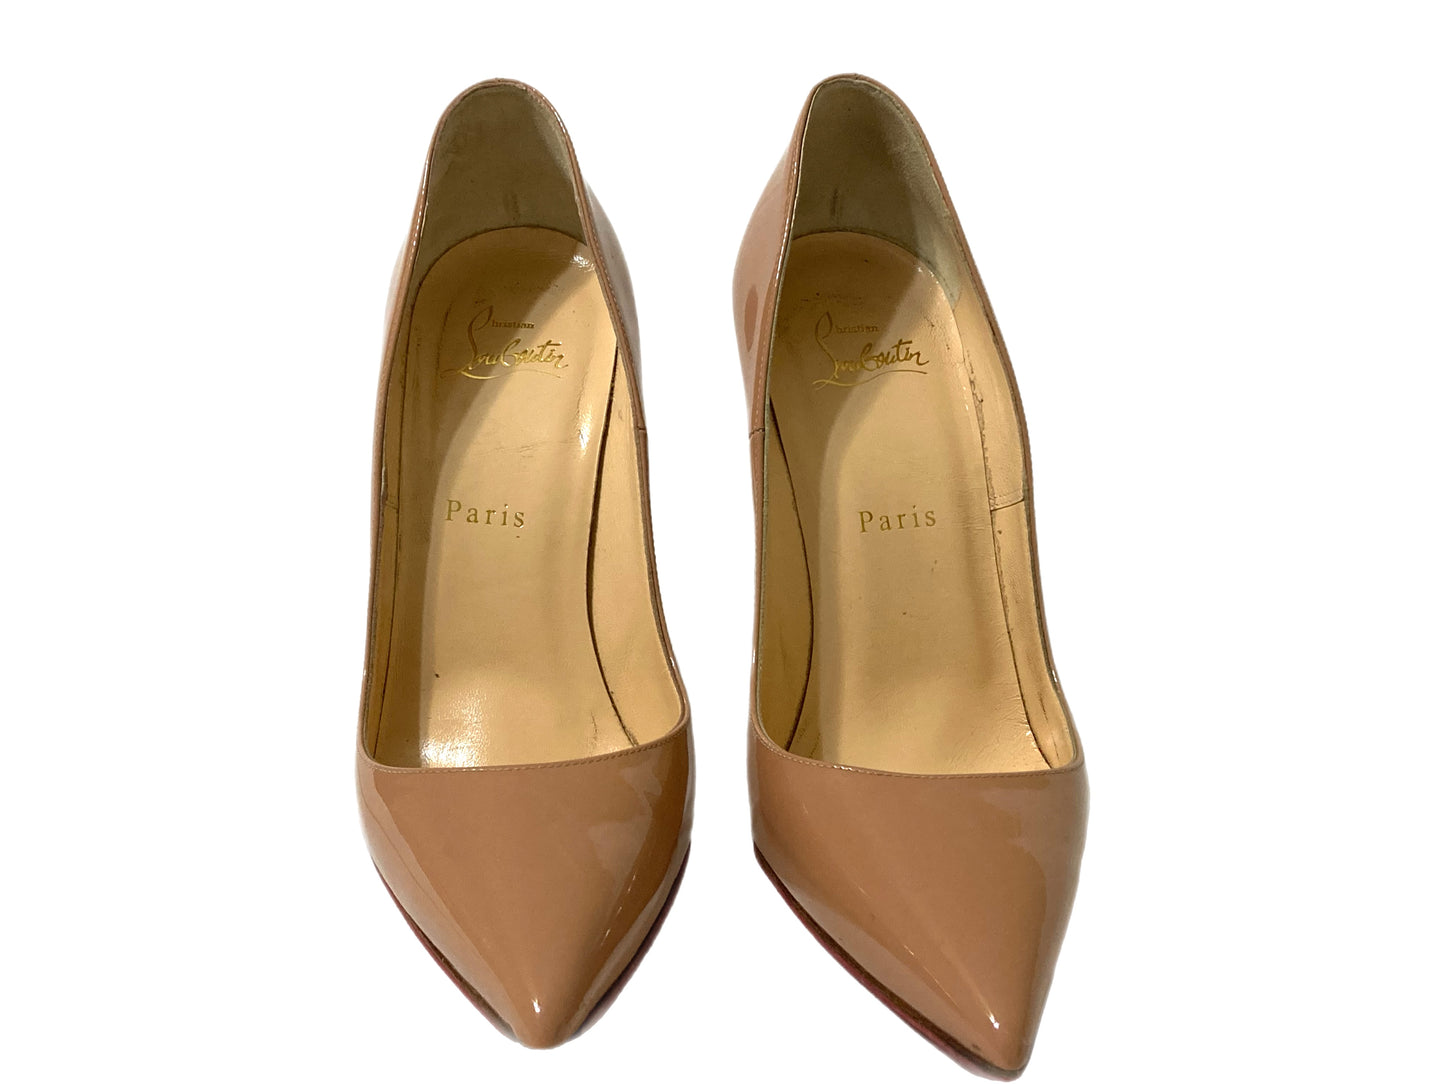 CHRISTIAN LOUBOUTIN Patent Leather So Kate 120 Pumps Nude Size 38